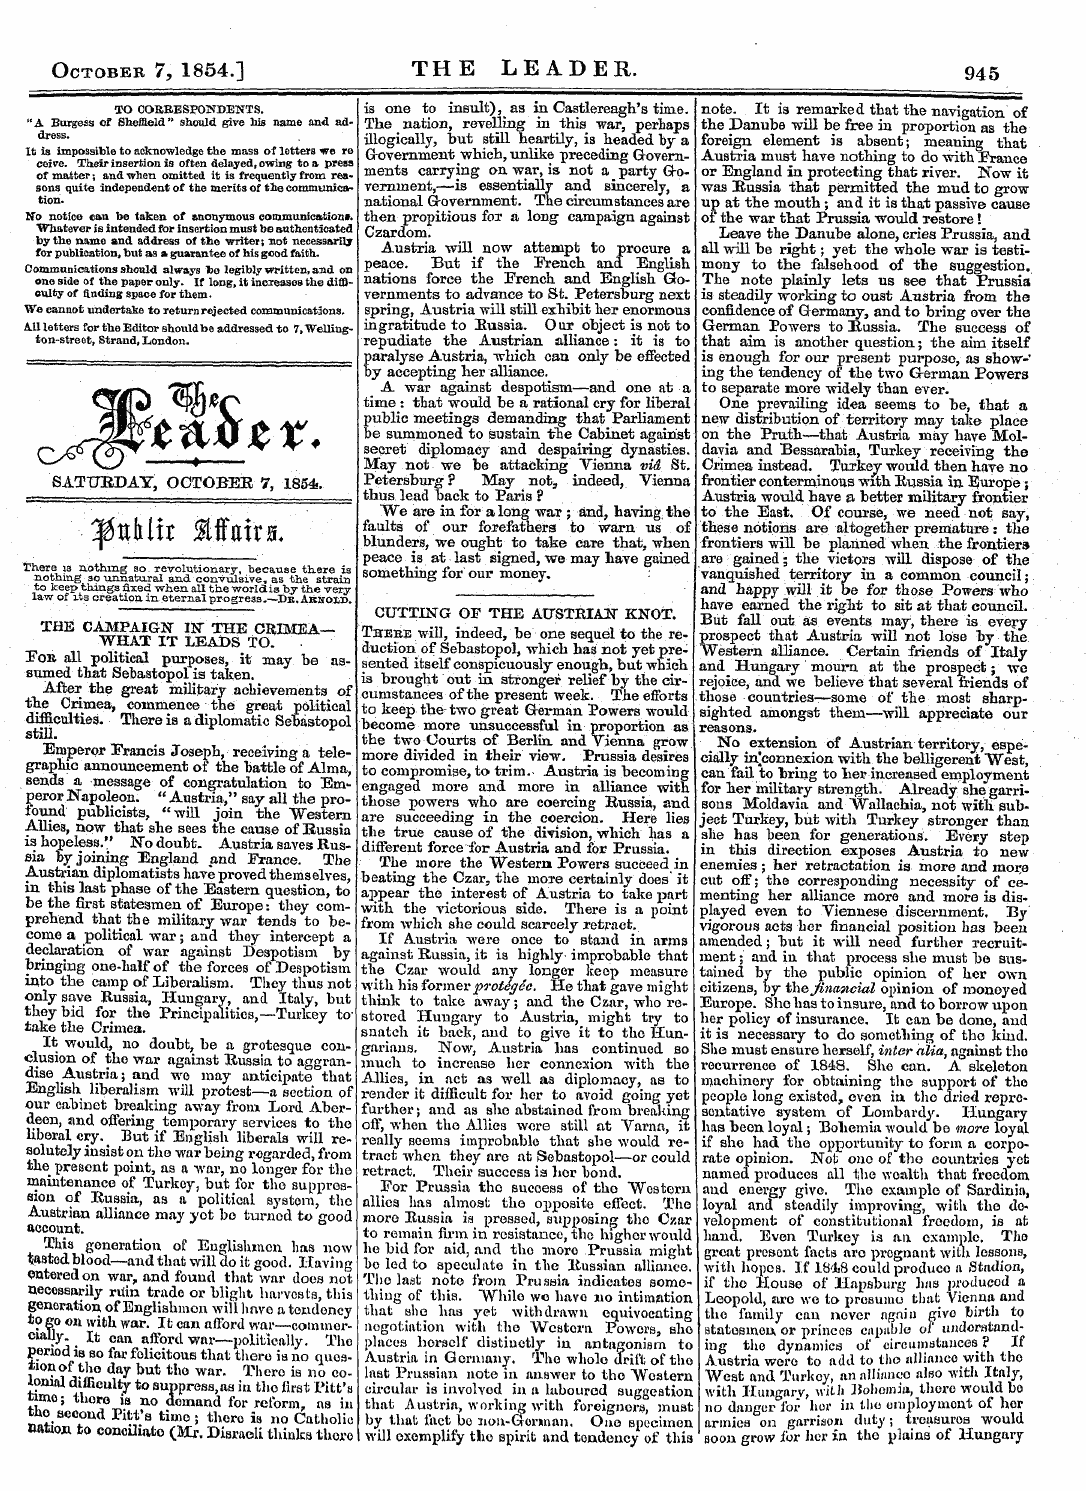 Leader (1850-1860): jS F Y, Country edition - October 7, 1854.] The Leader. 945